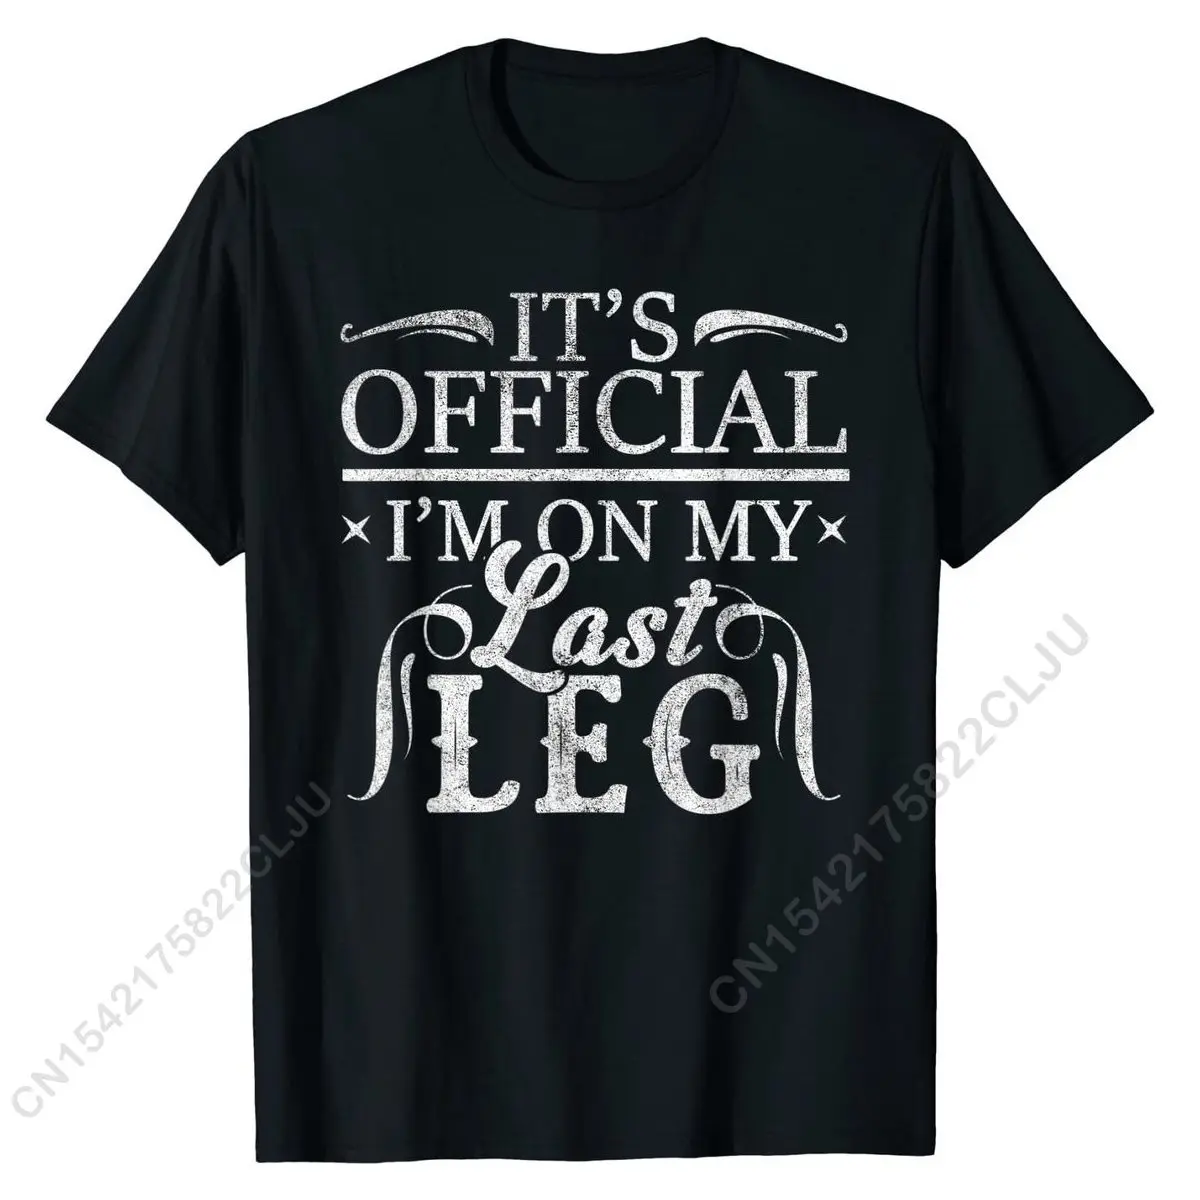 

It's Official I'm On My Last Leg Funny Amputee Humor Gift T-Shirt Casual Tops Tees For Men Company Cotton T Shirts Geek